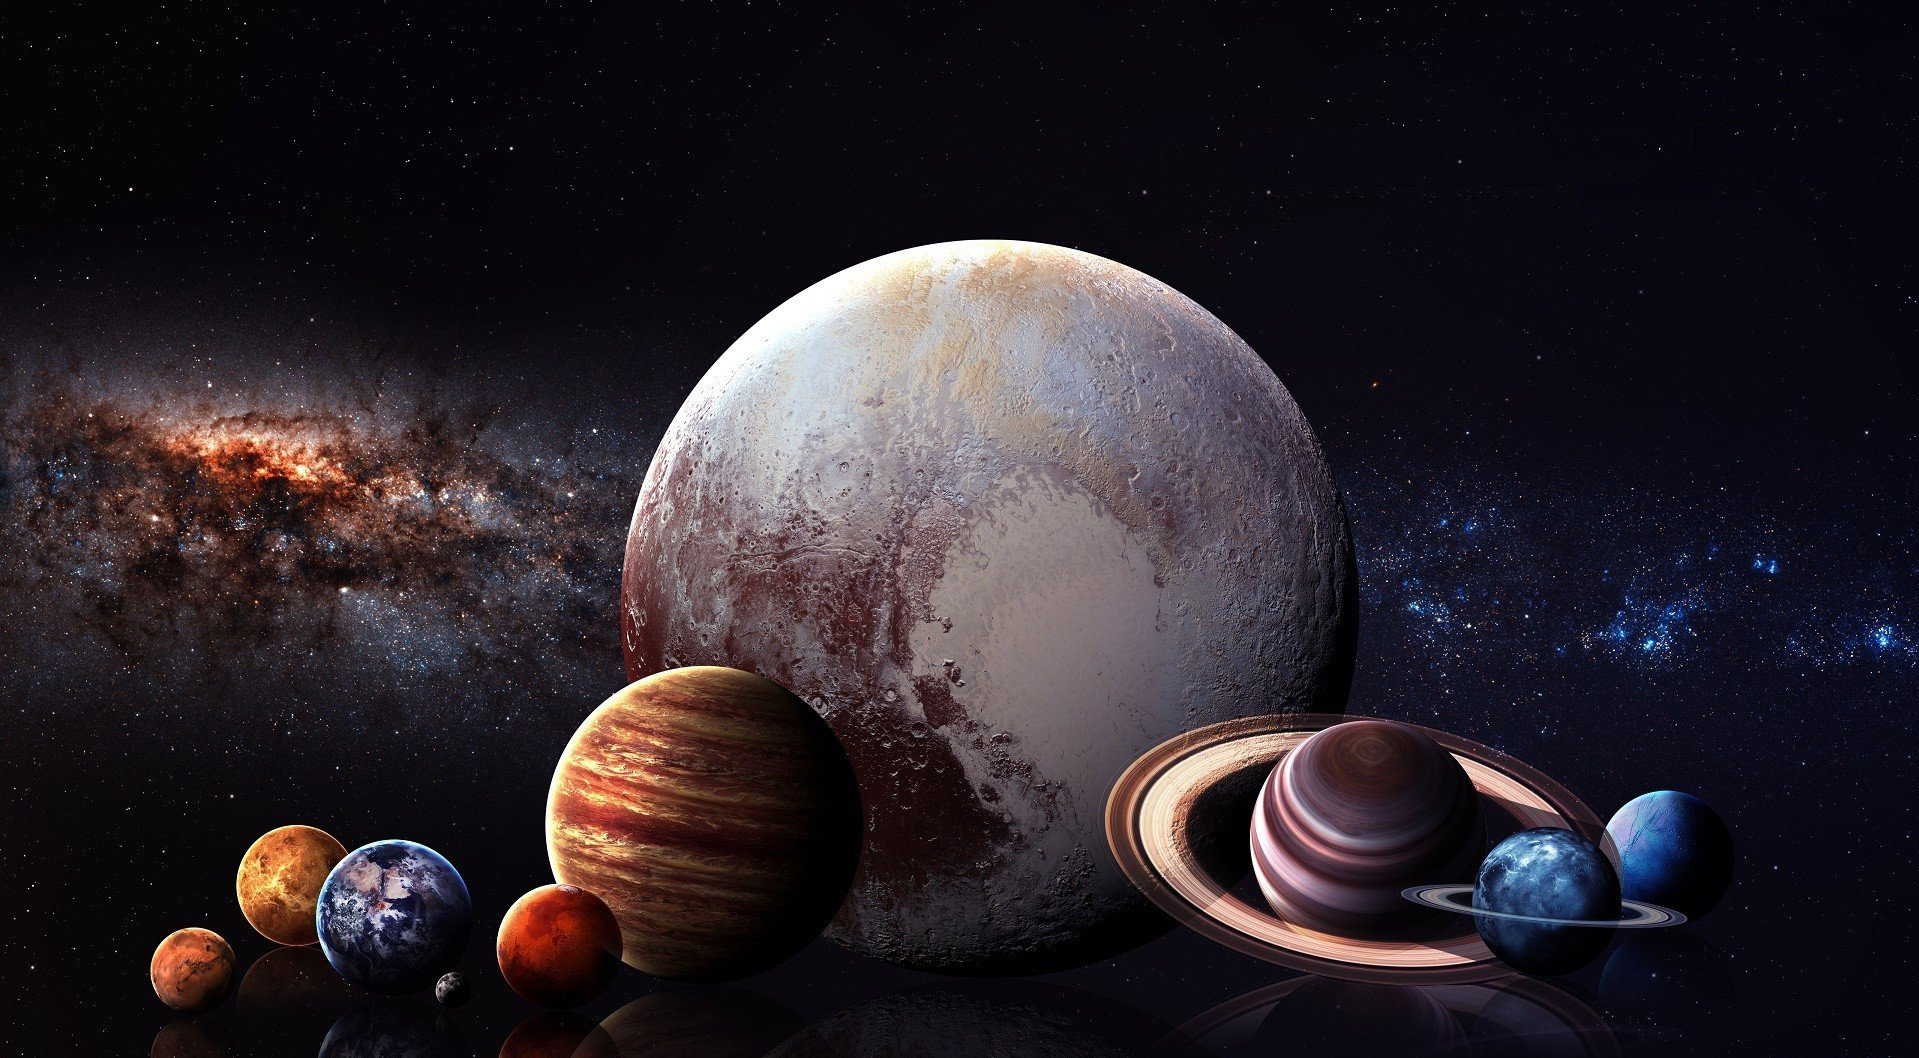 solar system wallpaper hd,still life photography,planet,outer space,still life,universe